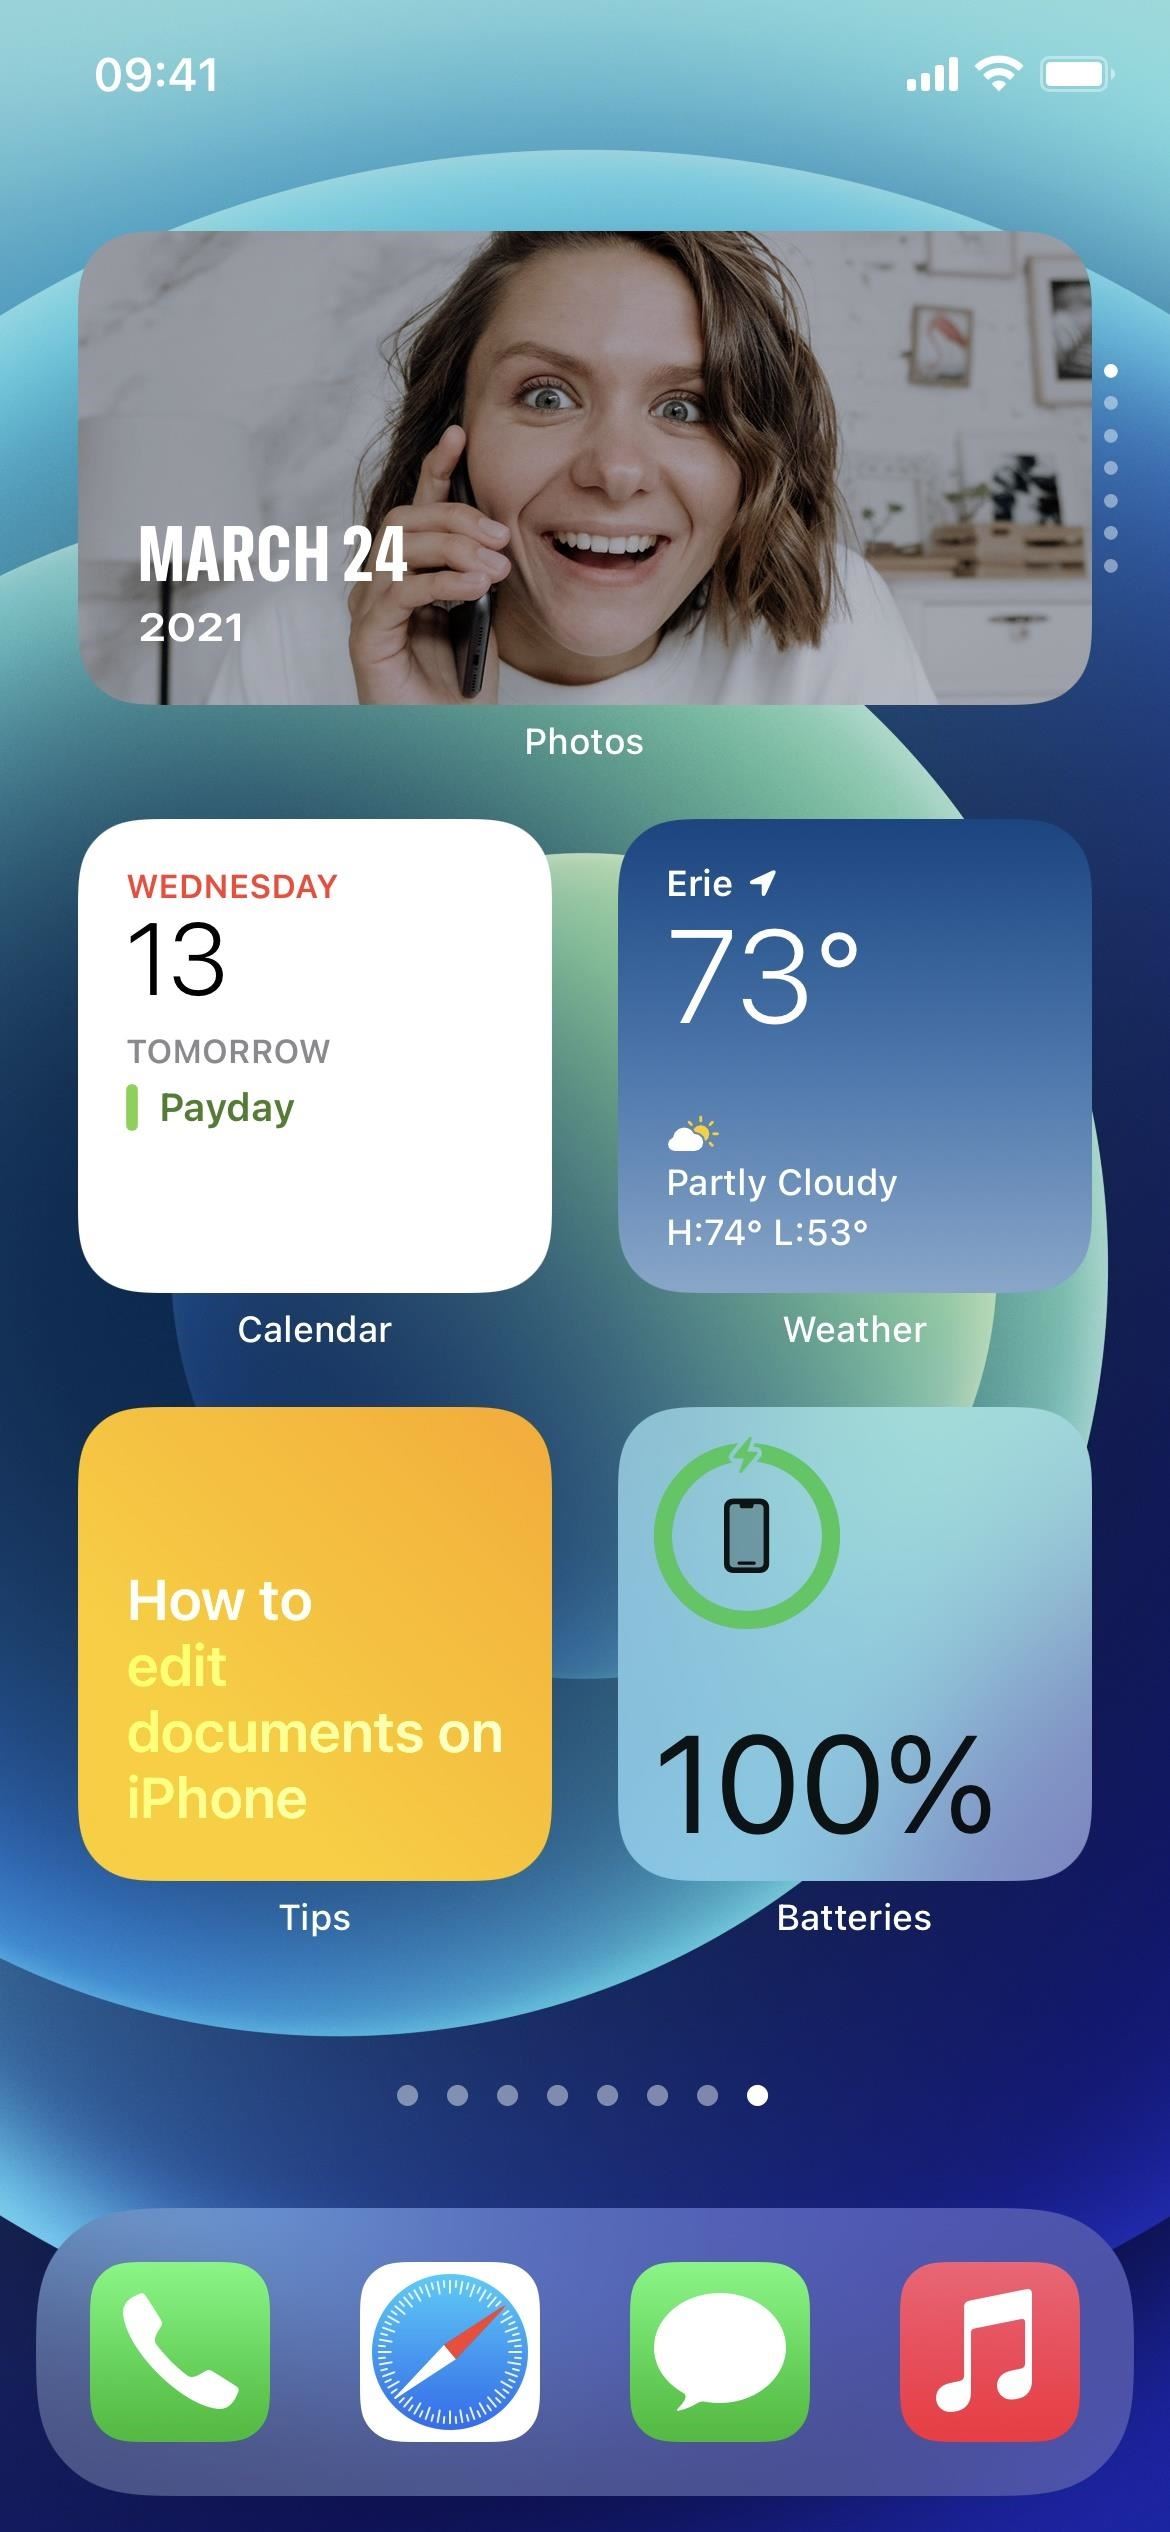 How to Hide All App, Folder, and Widget Names on Your iPhone or iPad's Home Screen